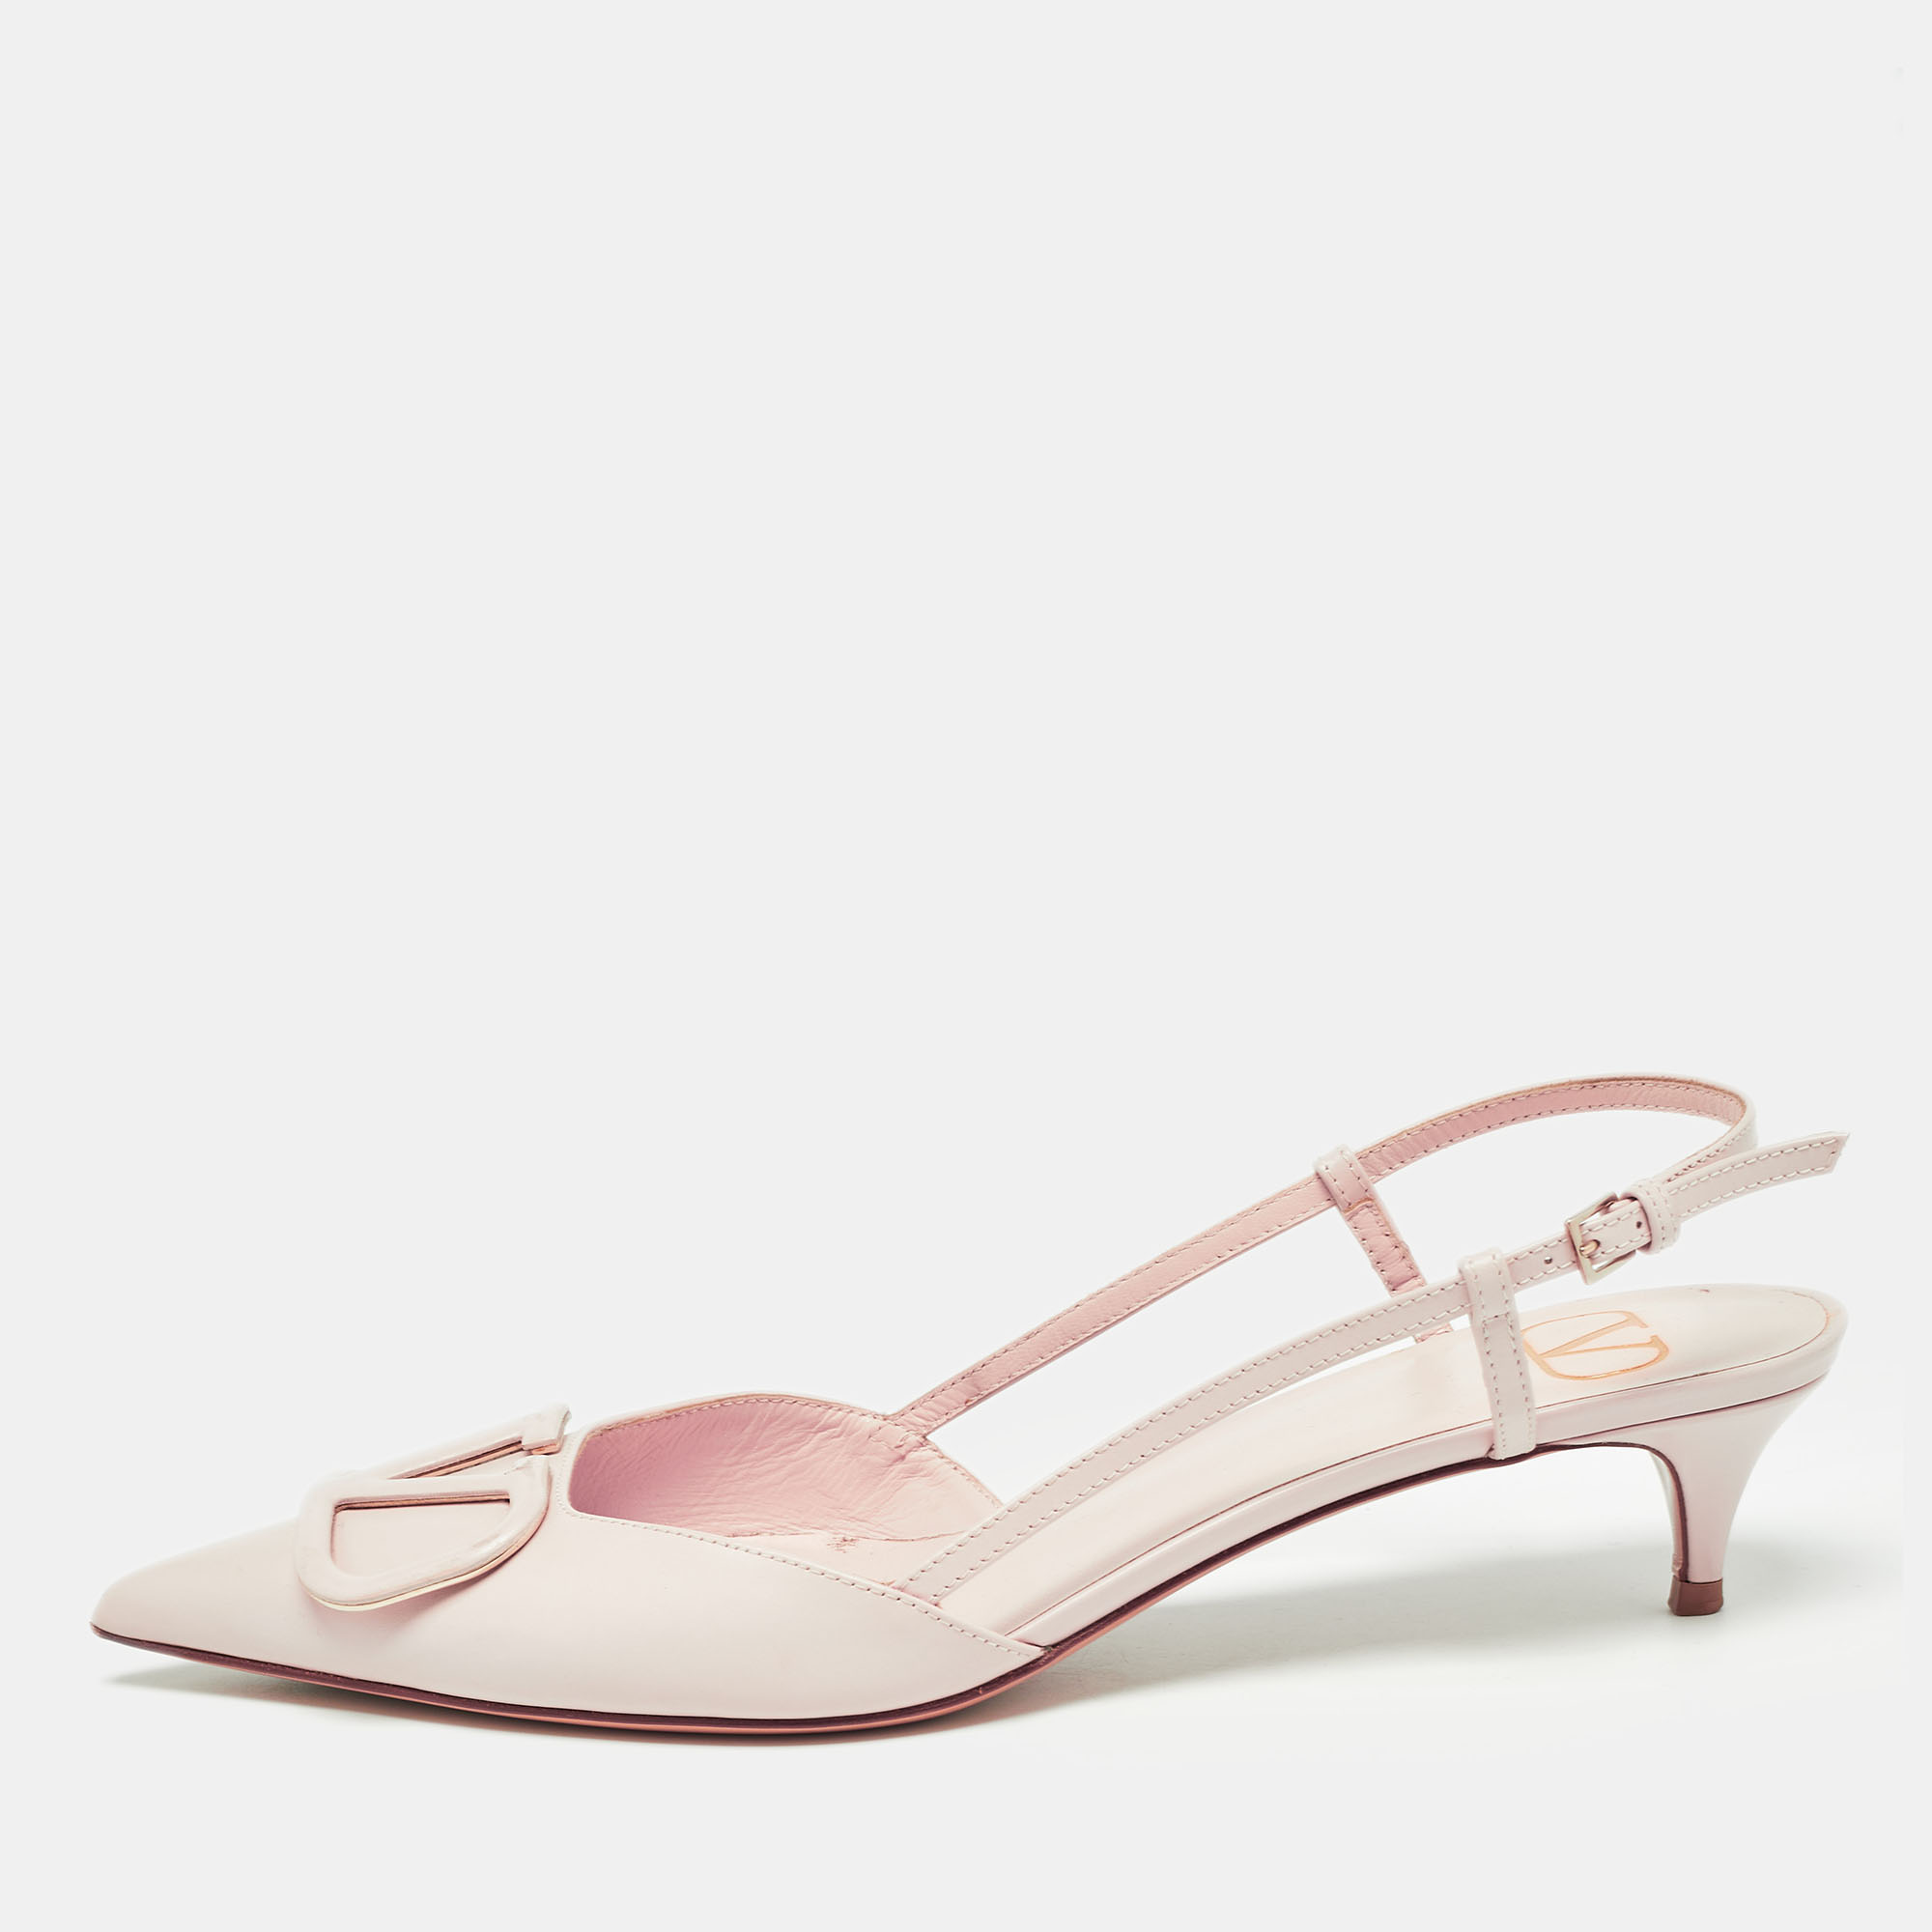 Valentino pink leather escape vlogo pointed toe slingback pumps size 39